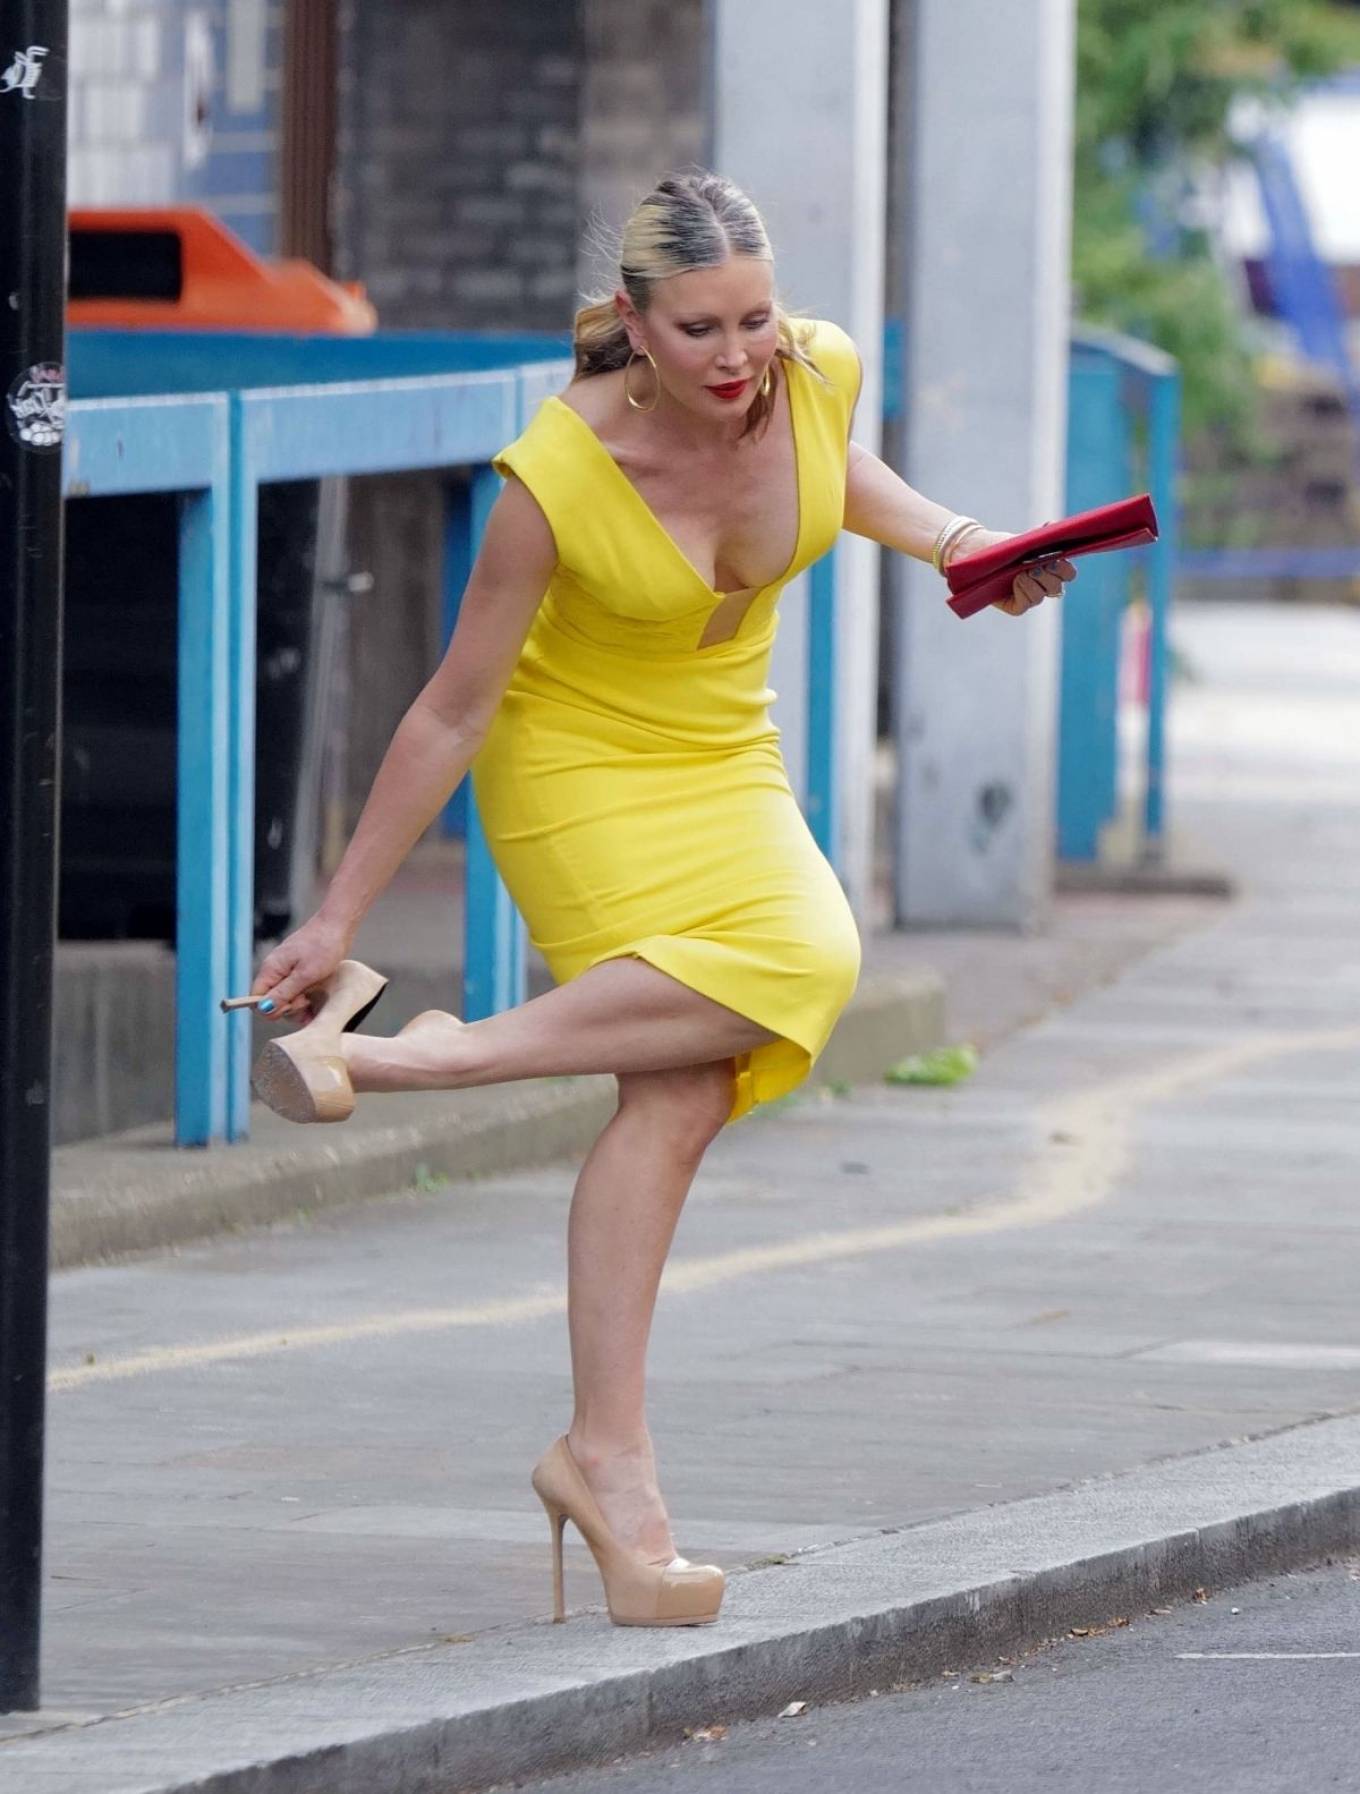 Caprice Bourret 2020 : Caprice Bourret – Pictured in a tight yellow dress while out in London -01